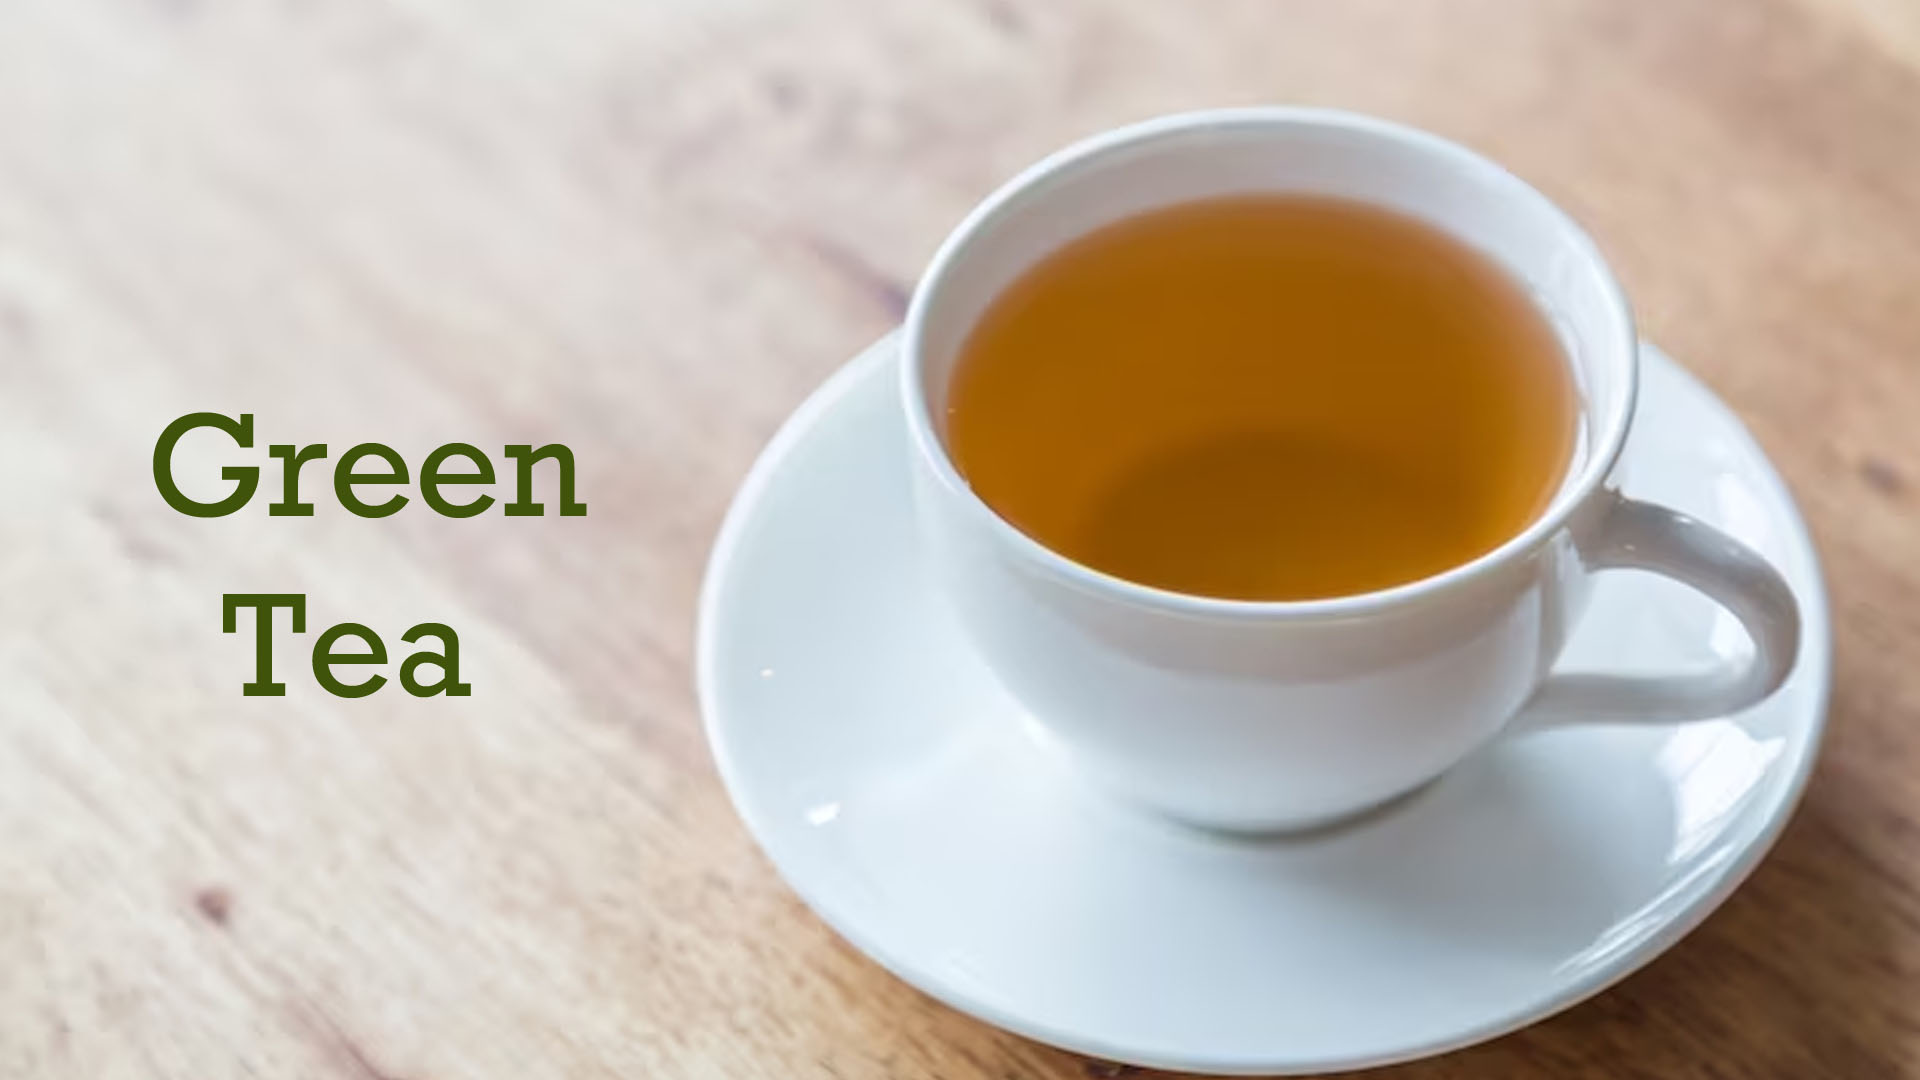 What Are The Health Benefits of Green Tea and Honey?